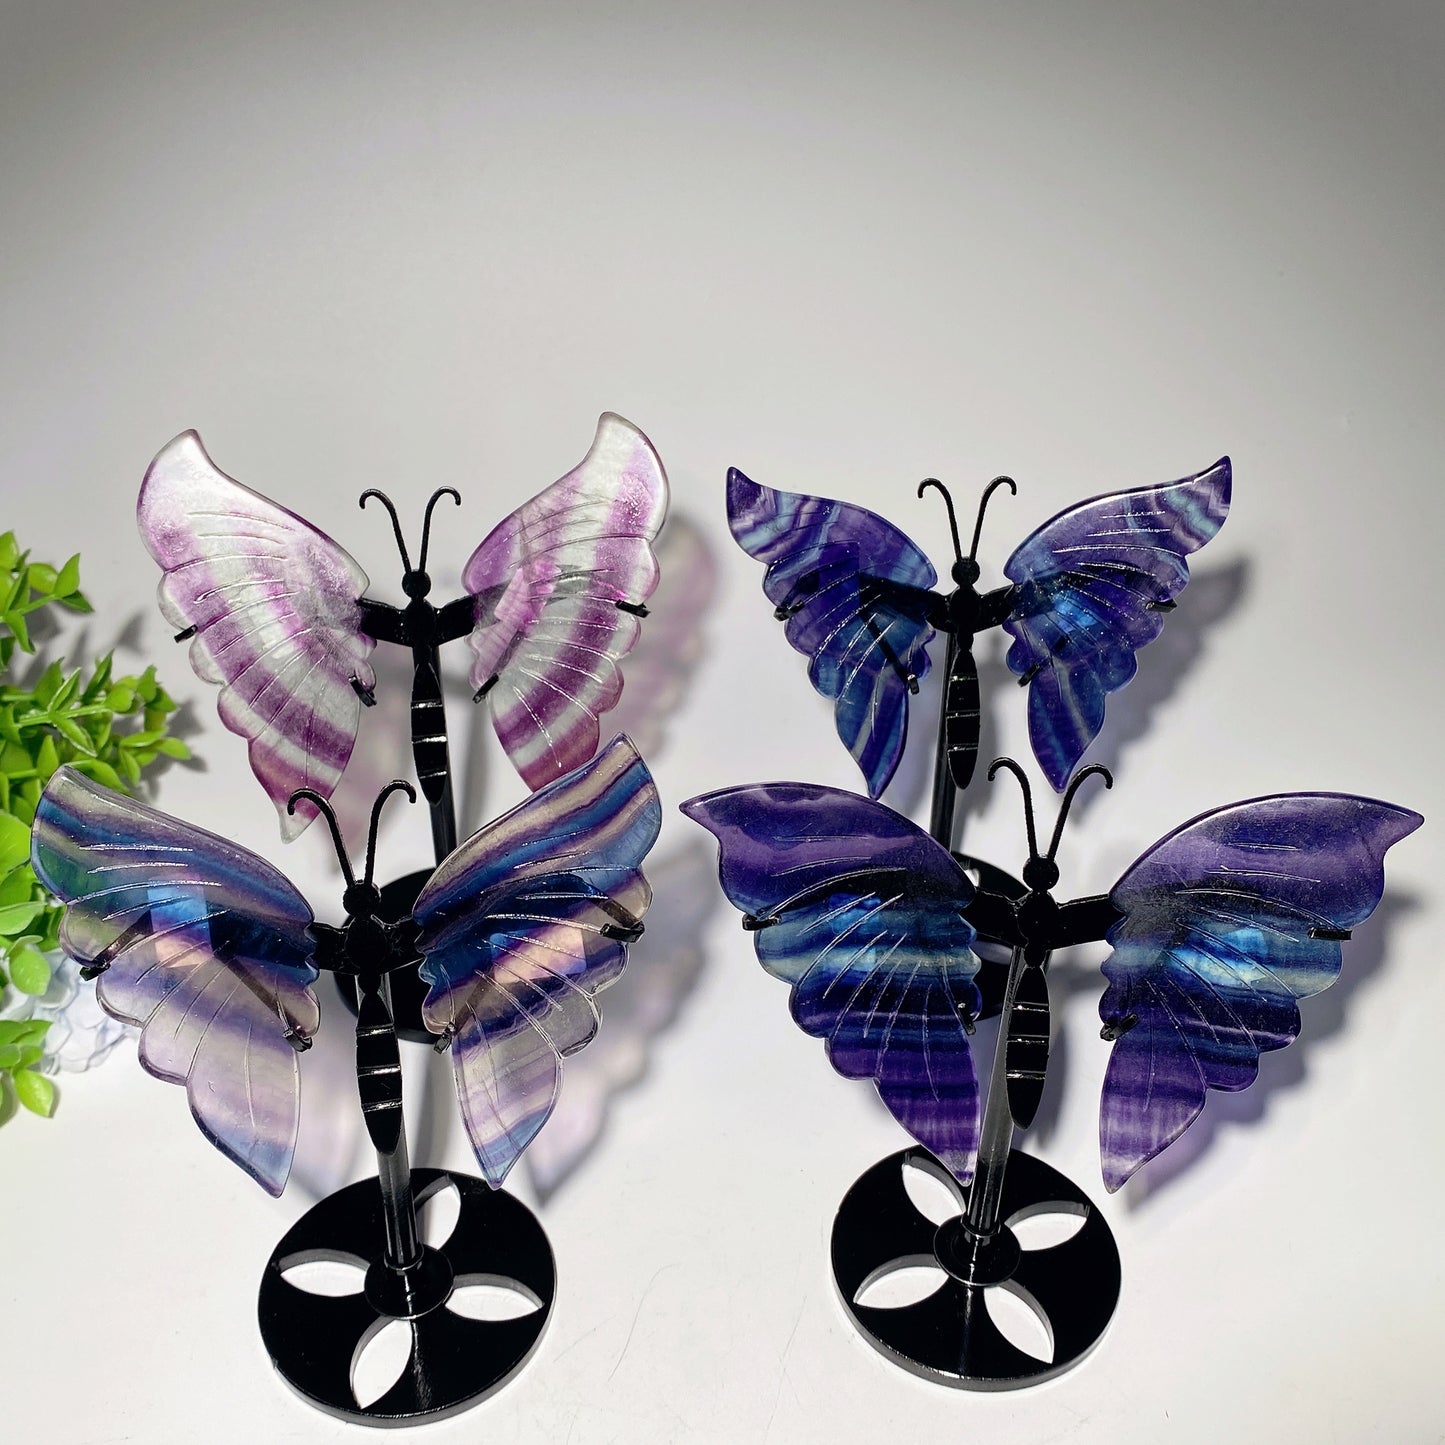 4.0" Fluorite Butterfly Wings with Stand Bulk Wholesale